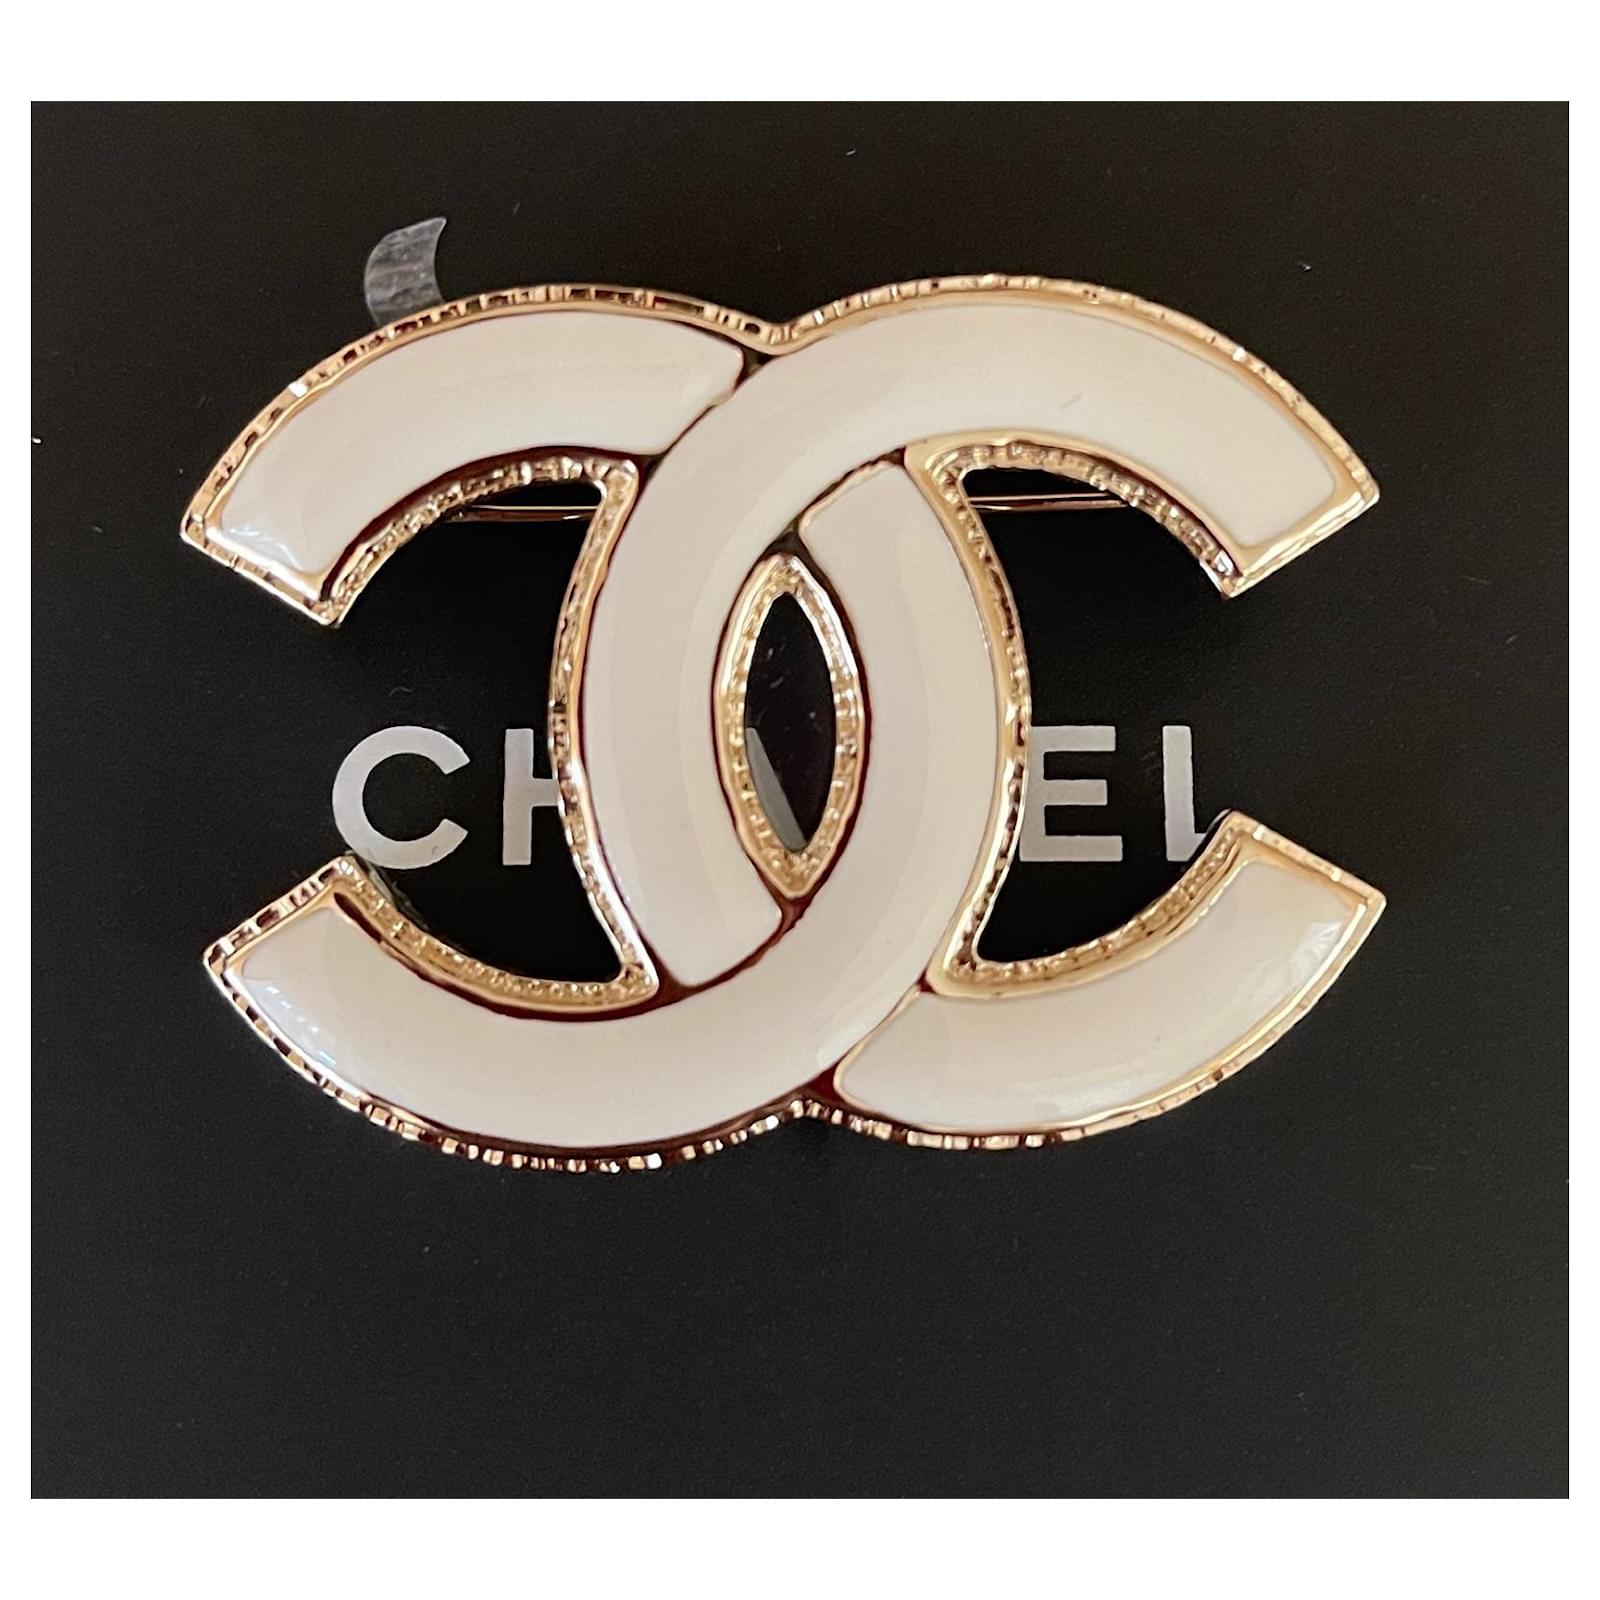 Chanel Vintage Gold CC Brooch  Rent Chanel jewelry for $55/month